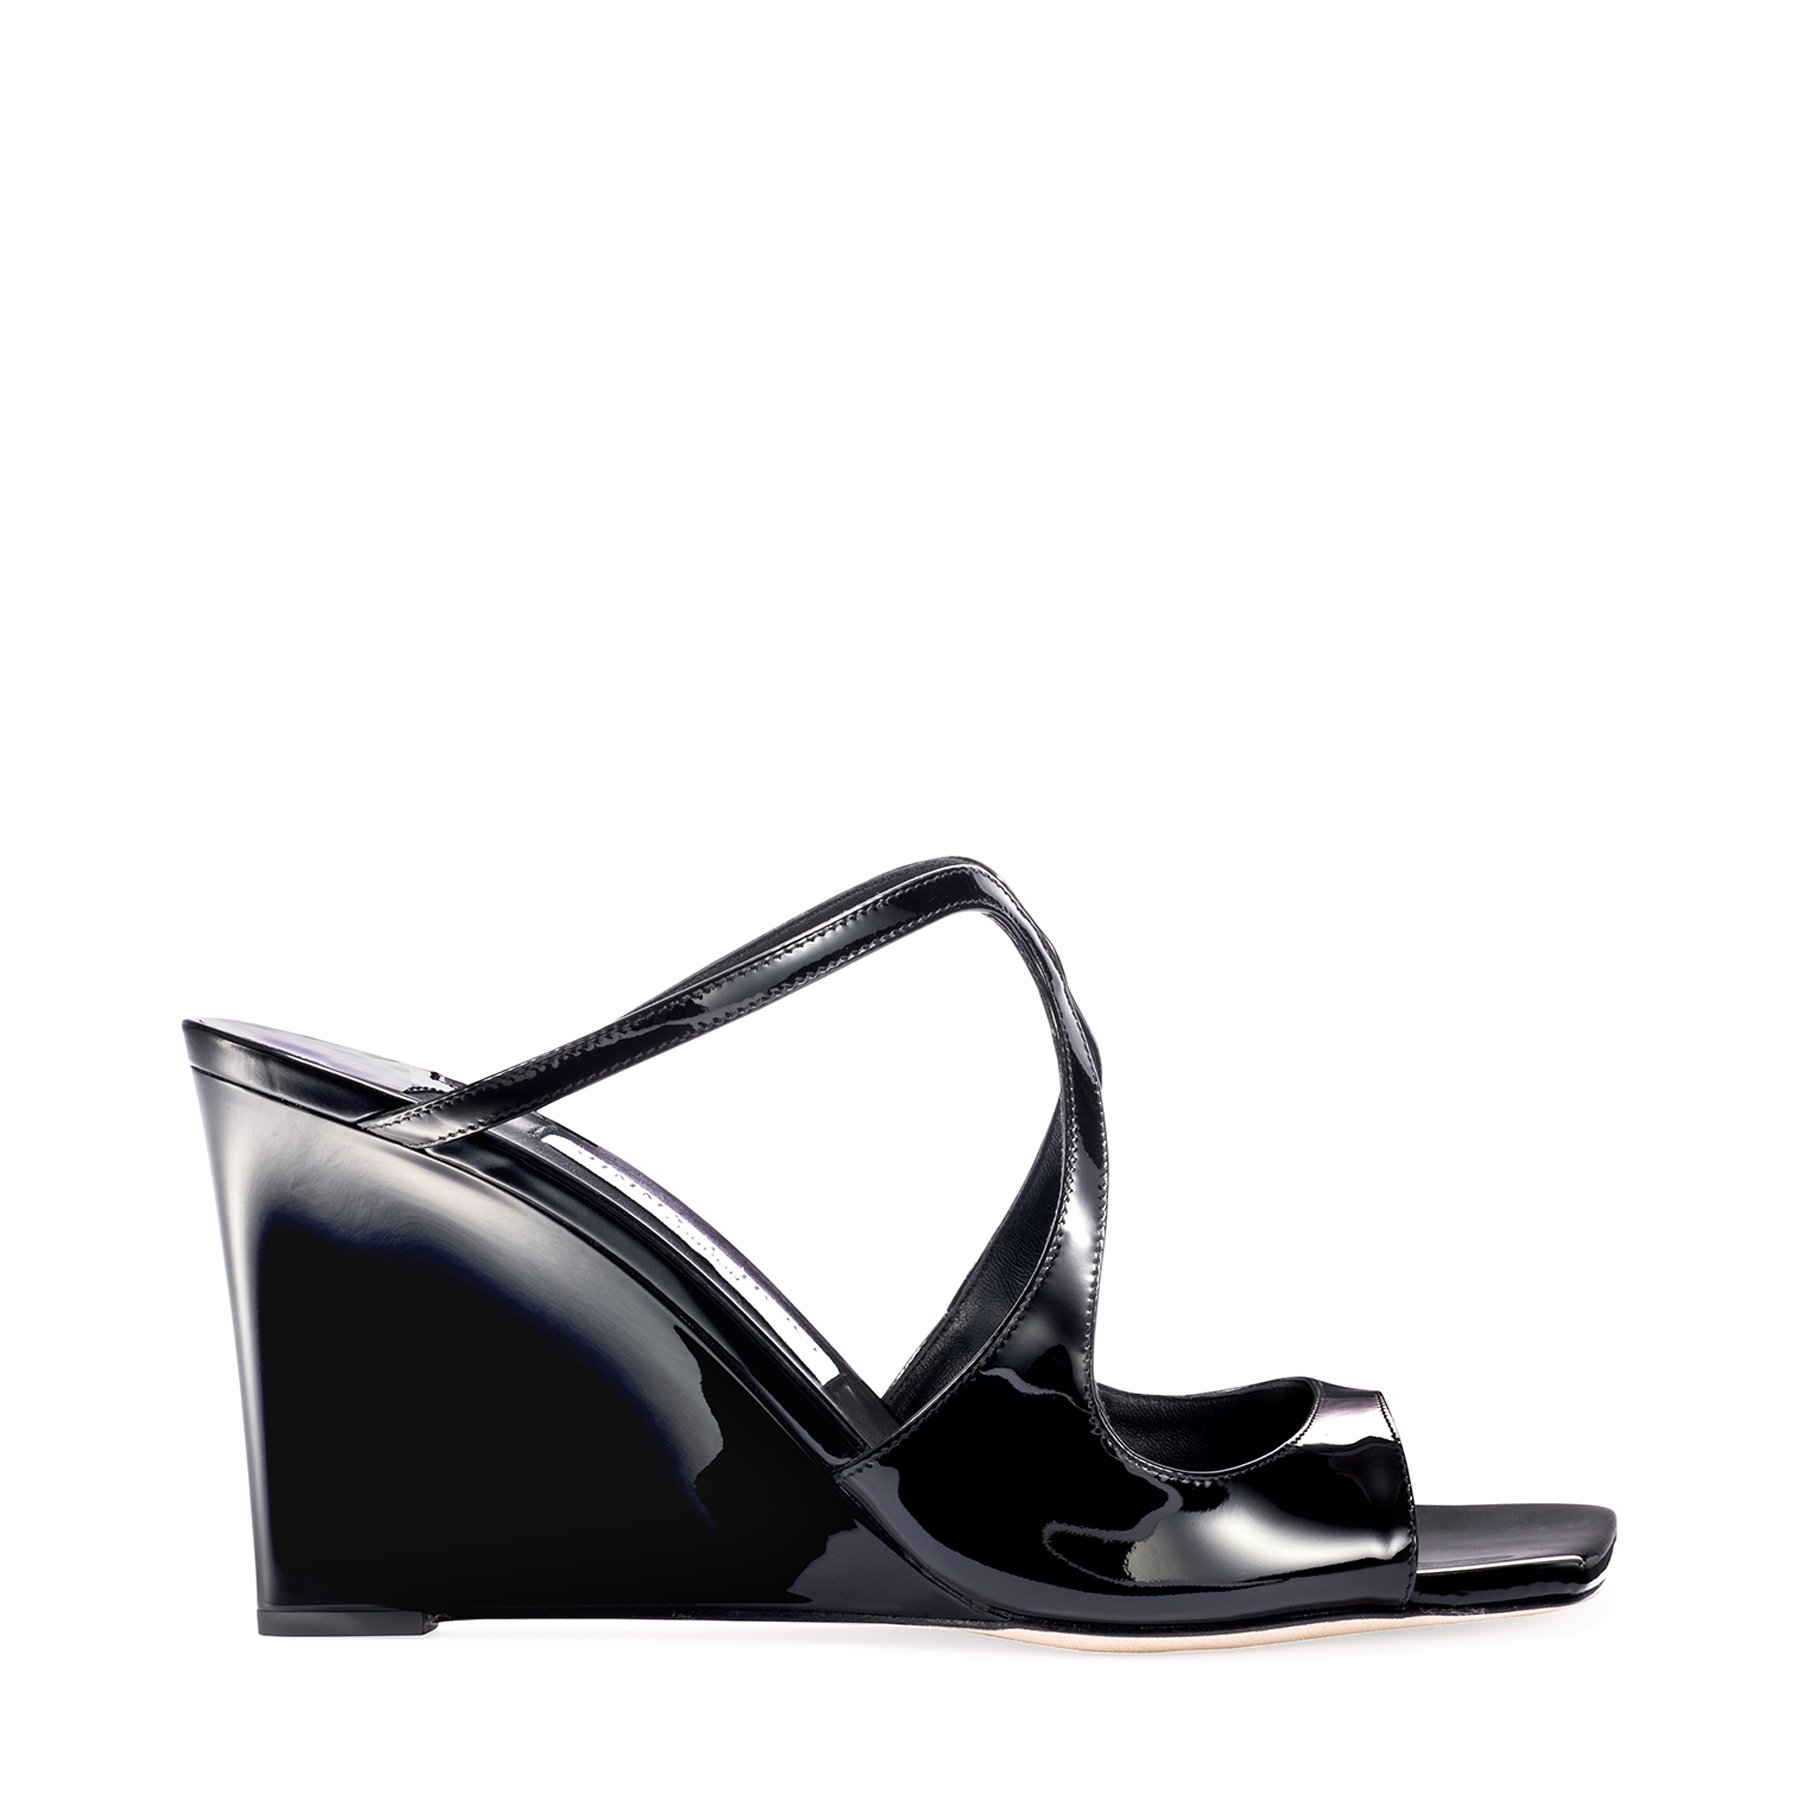 ANISE WEDGE 85 - PATENT LEATHER - BLACK.jpg